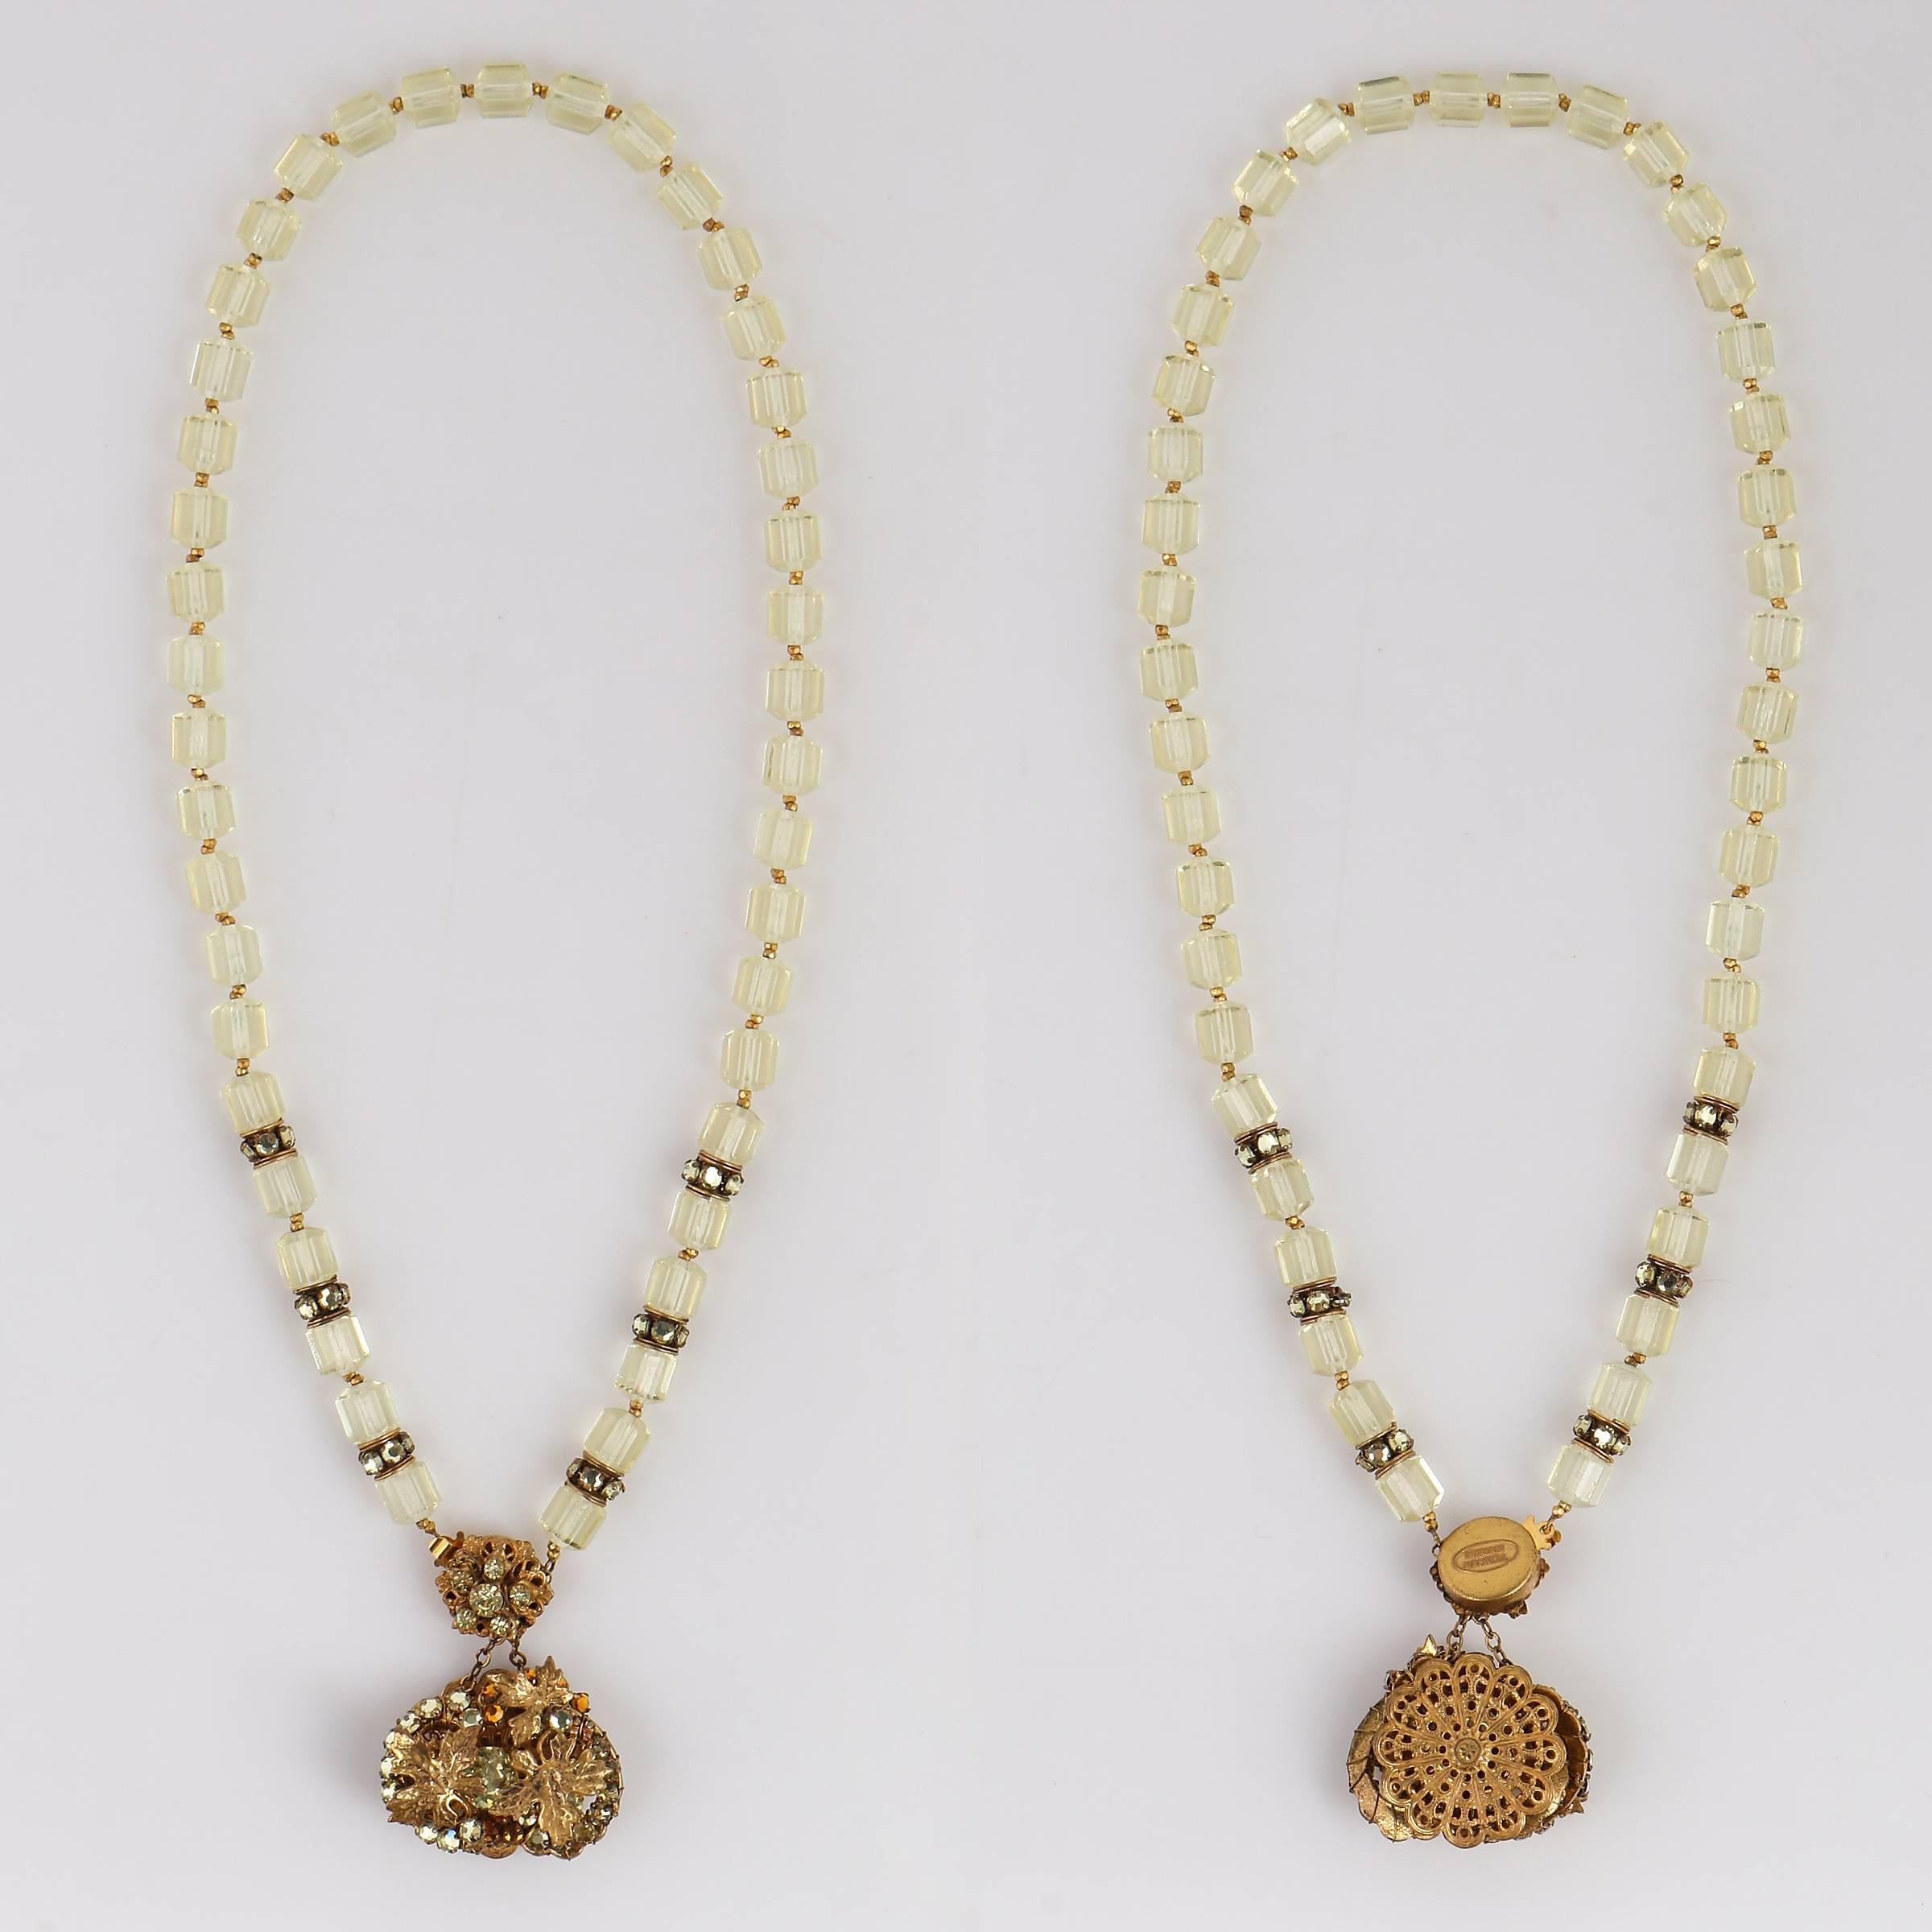 crystal beads necklace designs in gold